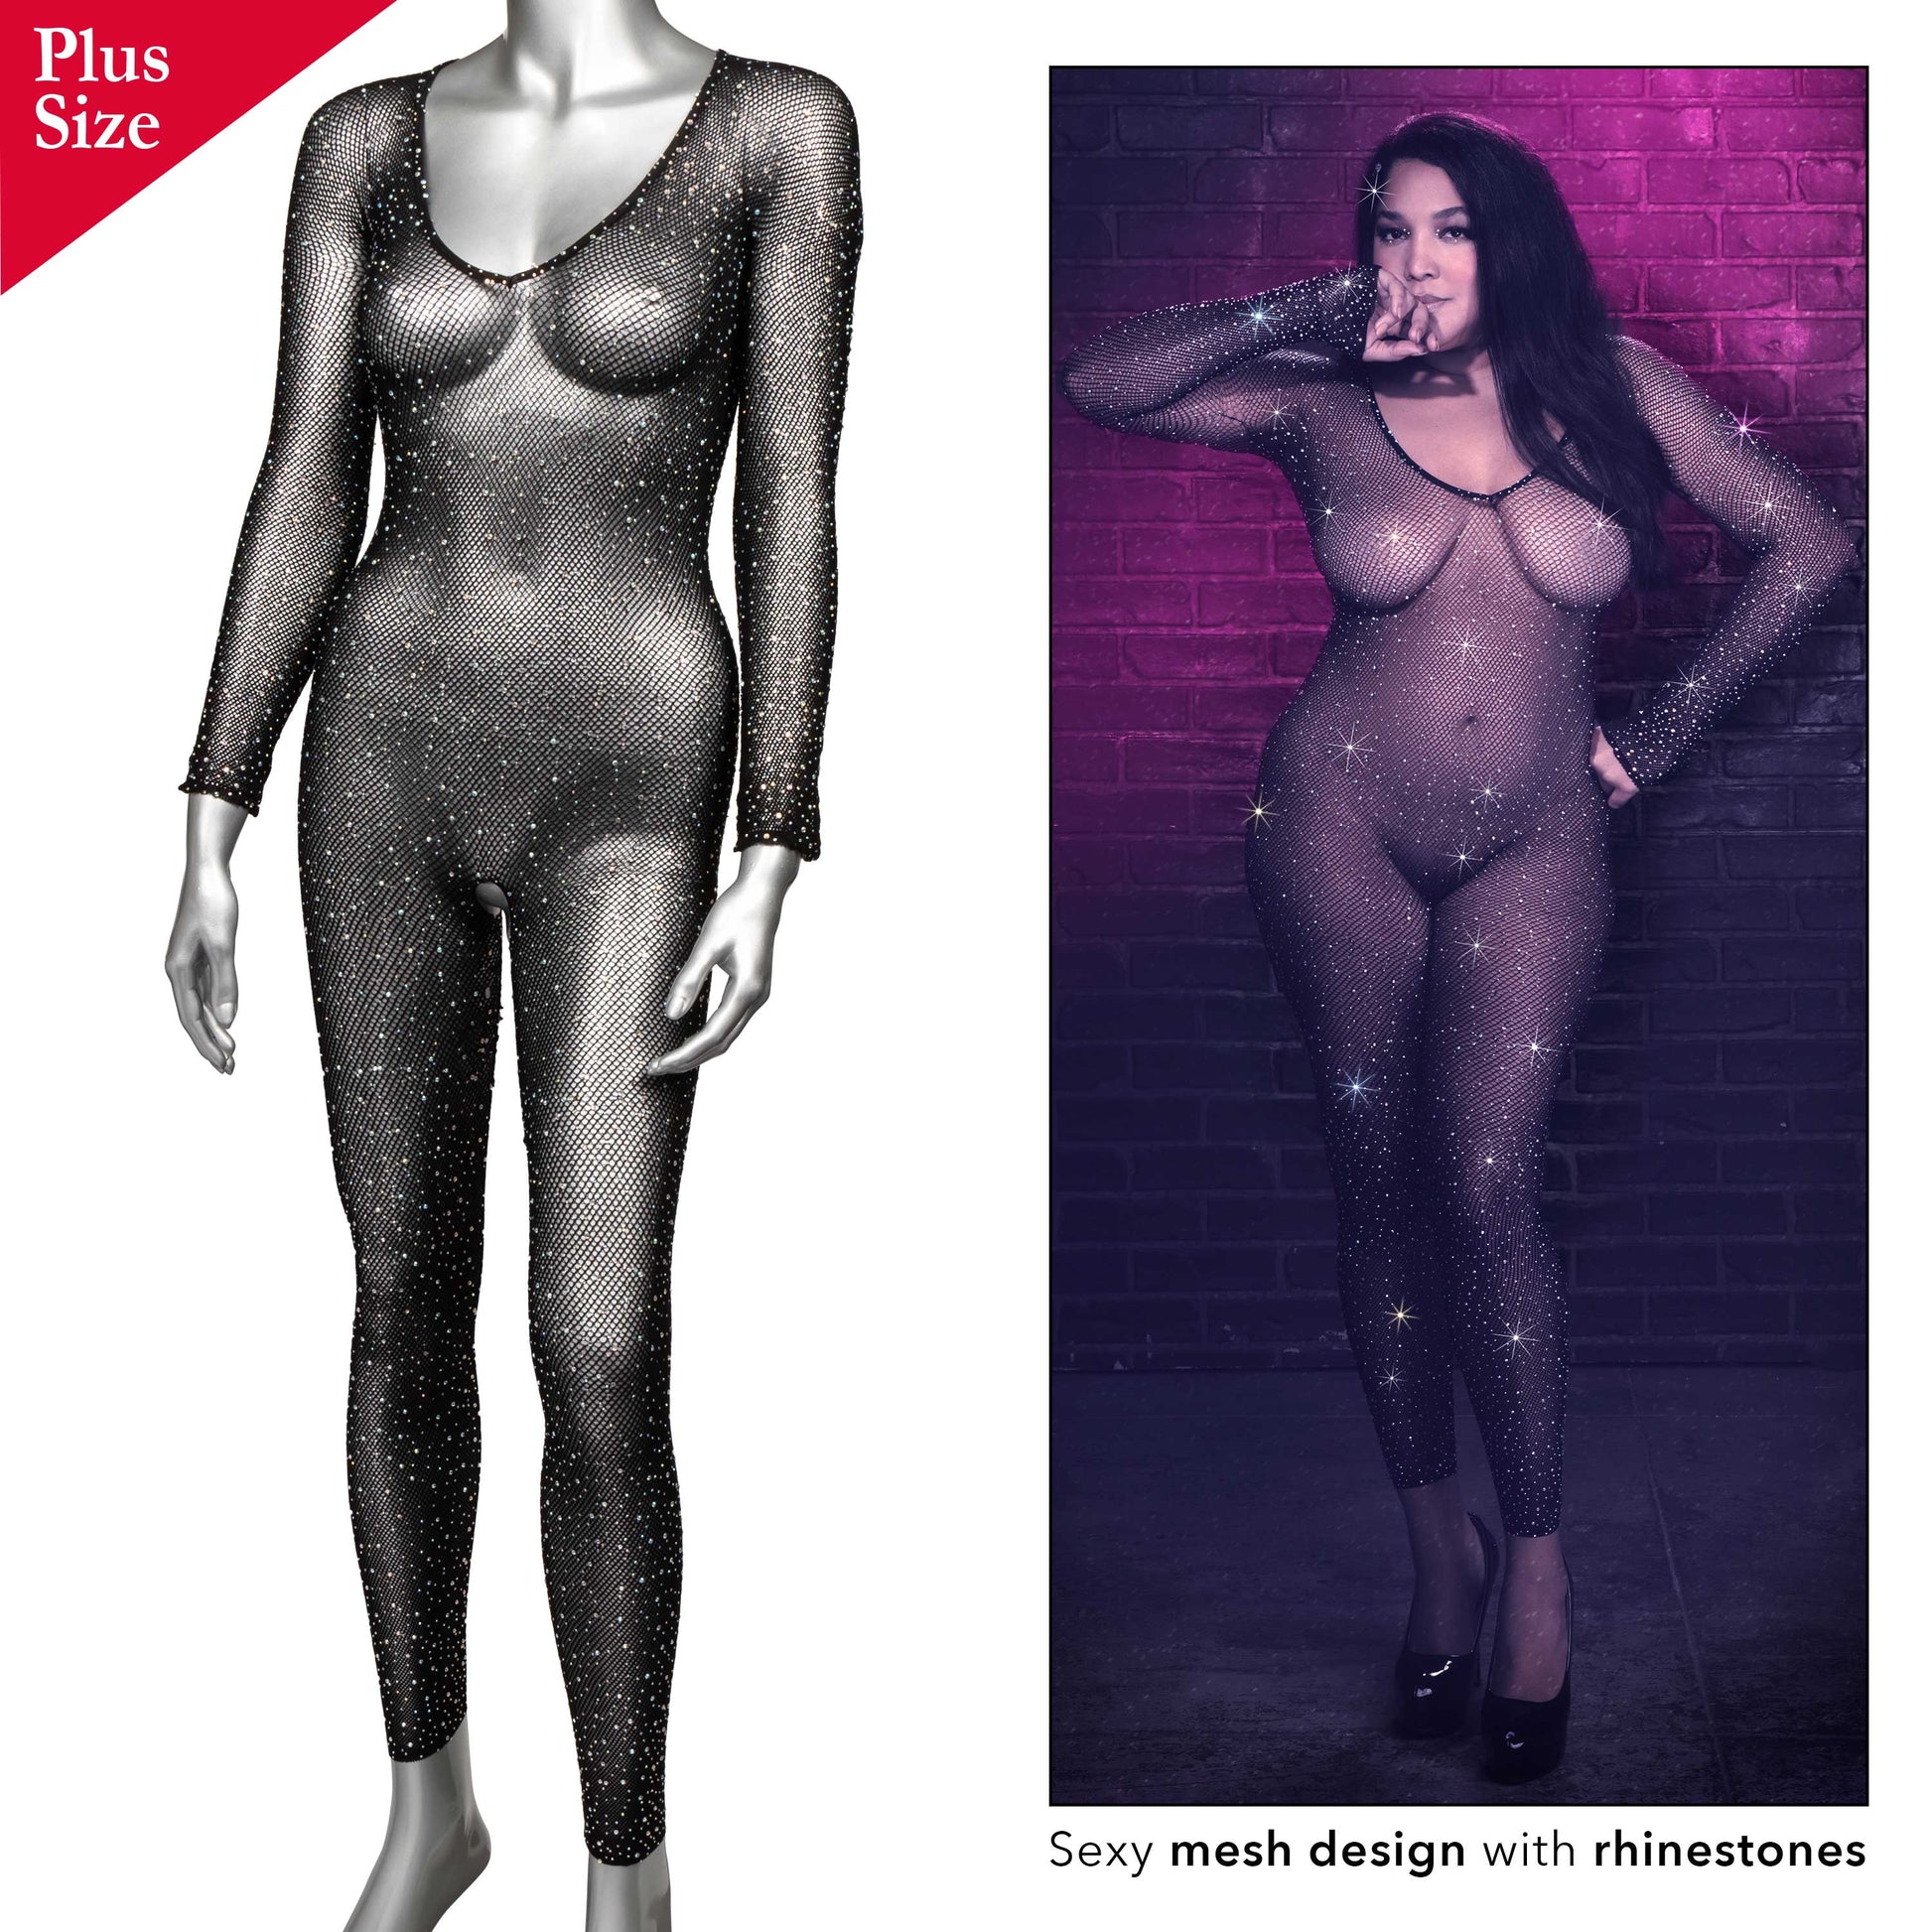 Radiance Crotchless Full Body Suit - Queen - Black